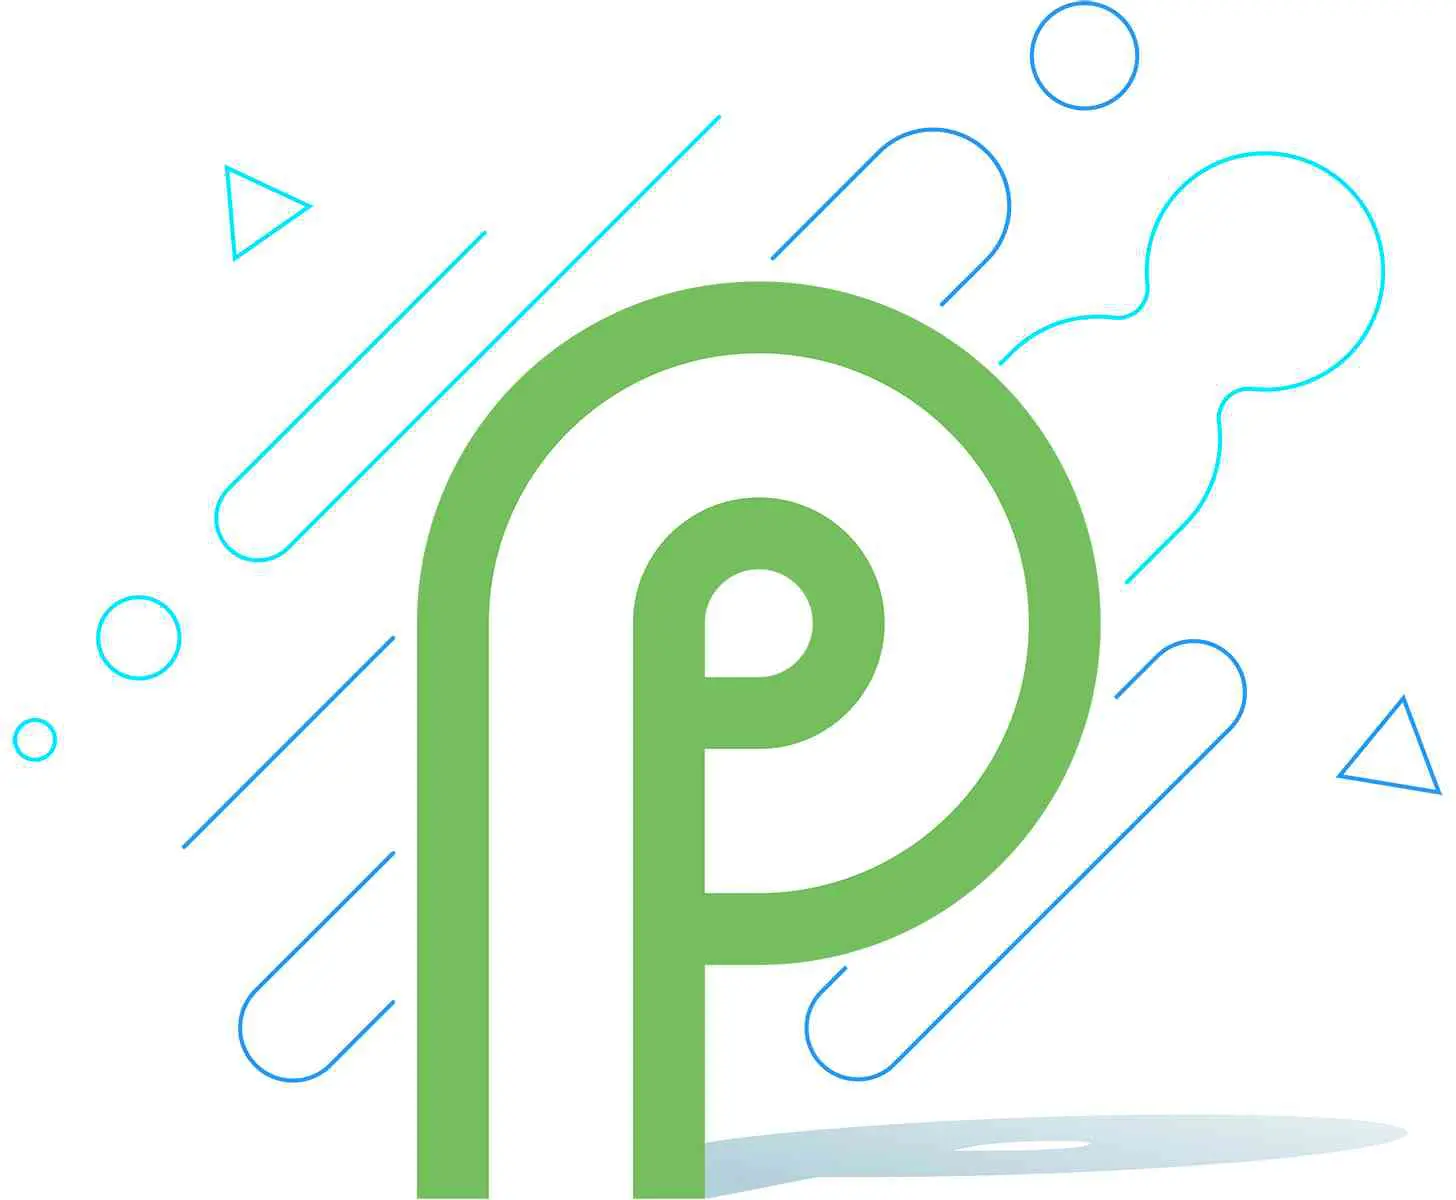 Android P logo official